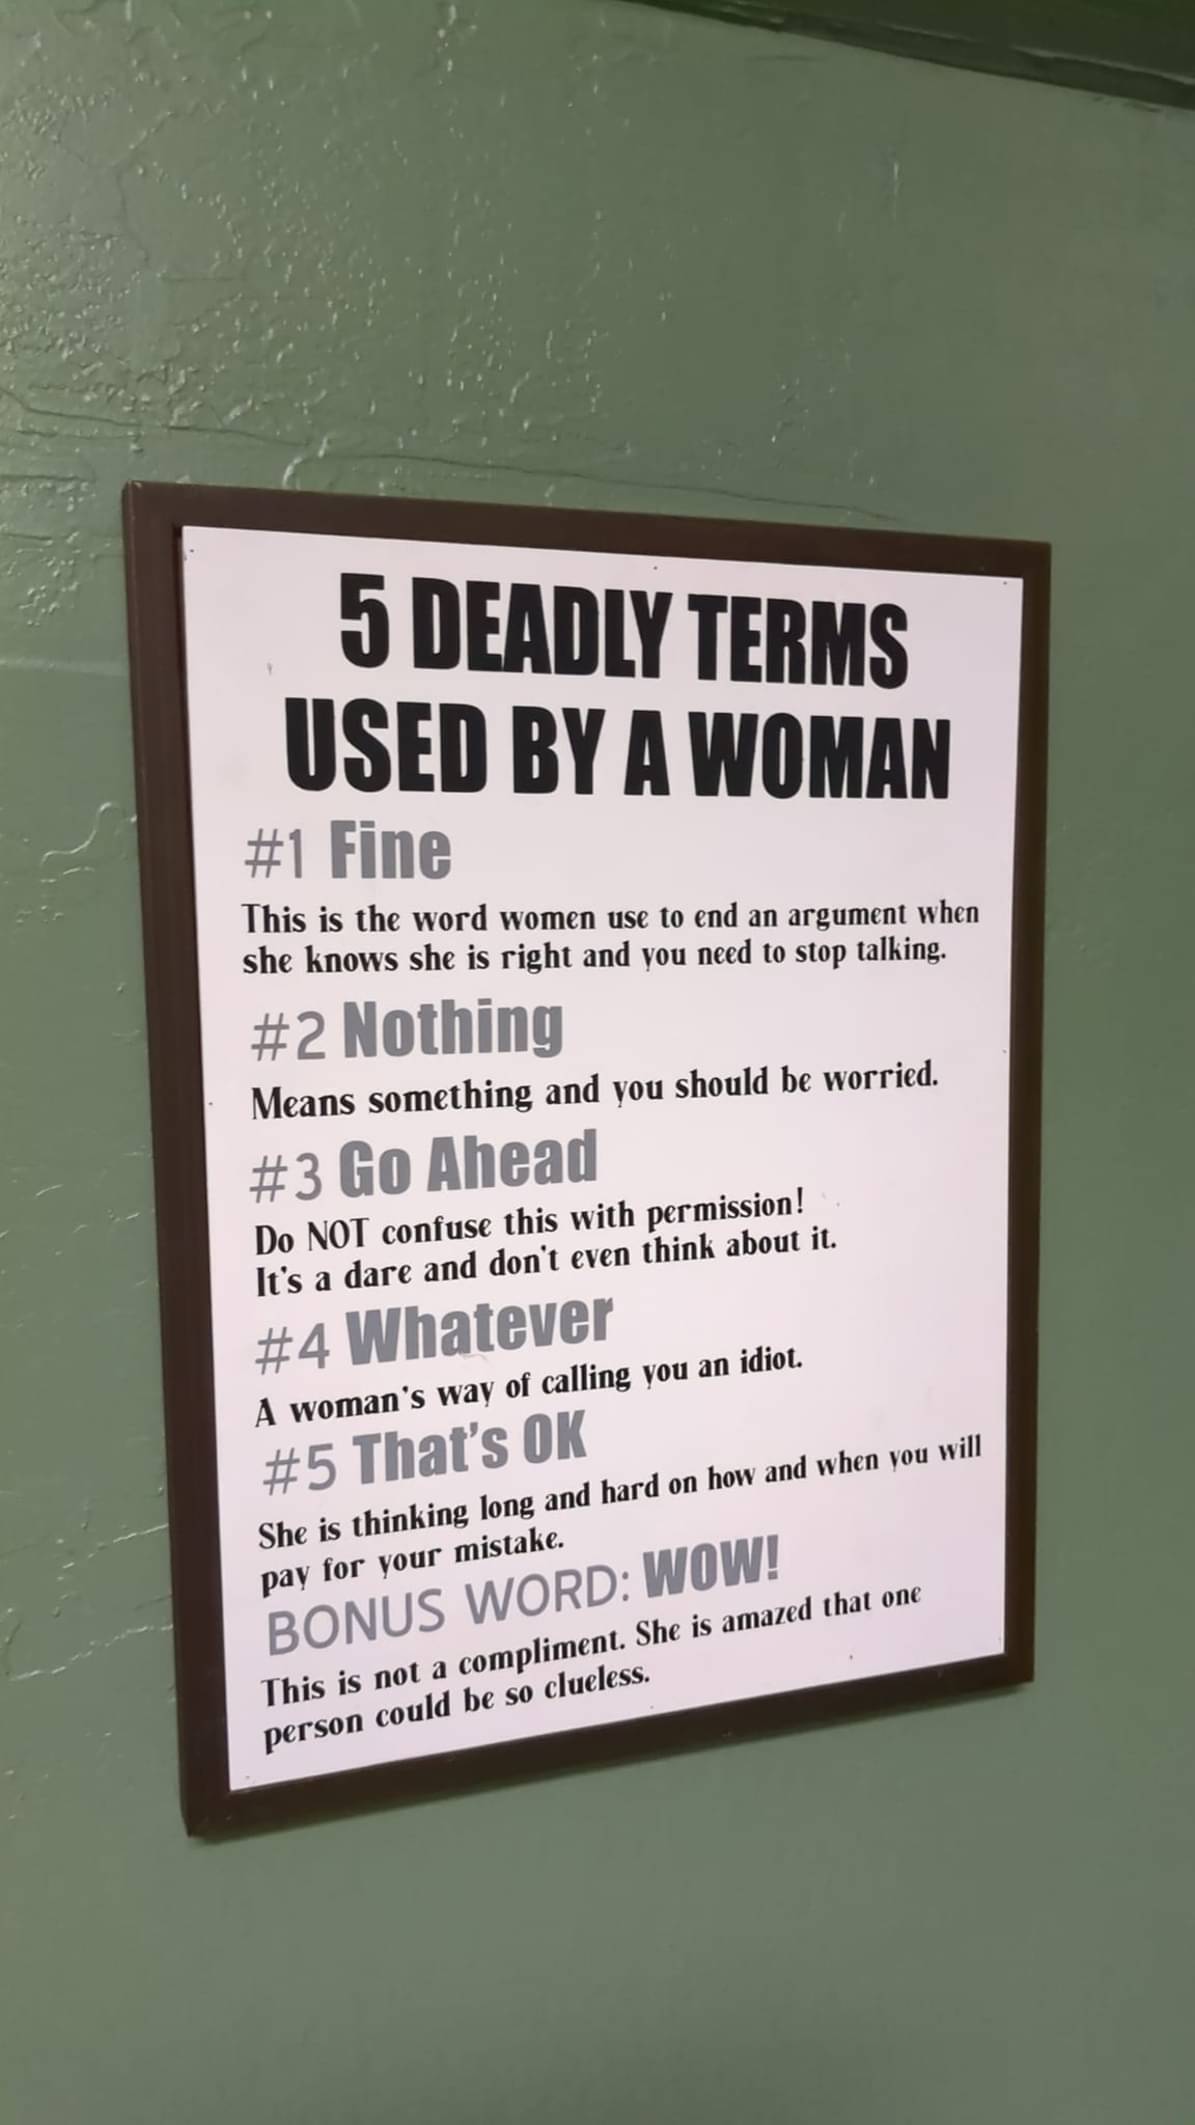 5_deadly_terms_used_by_a_woman.jpg